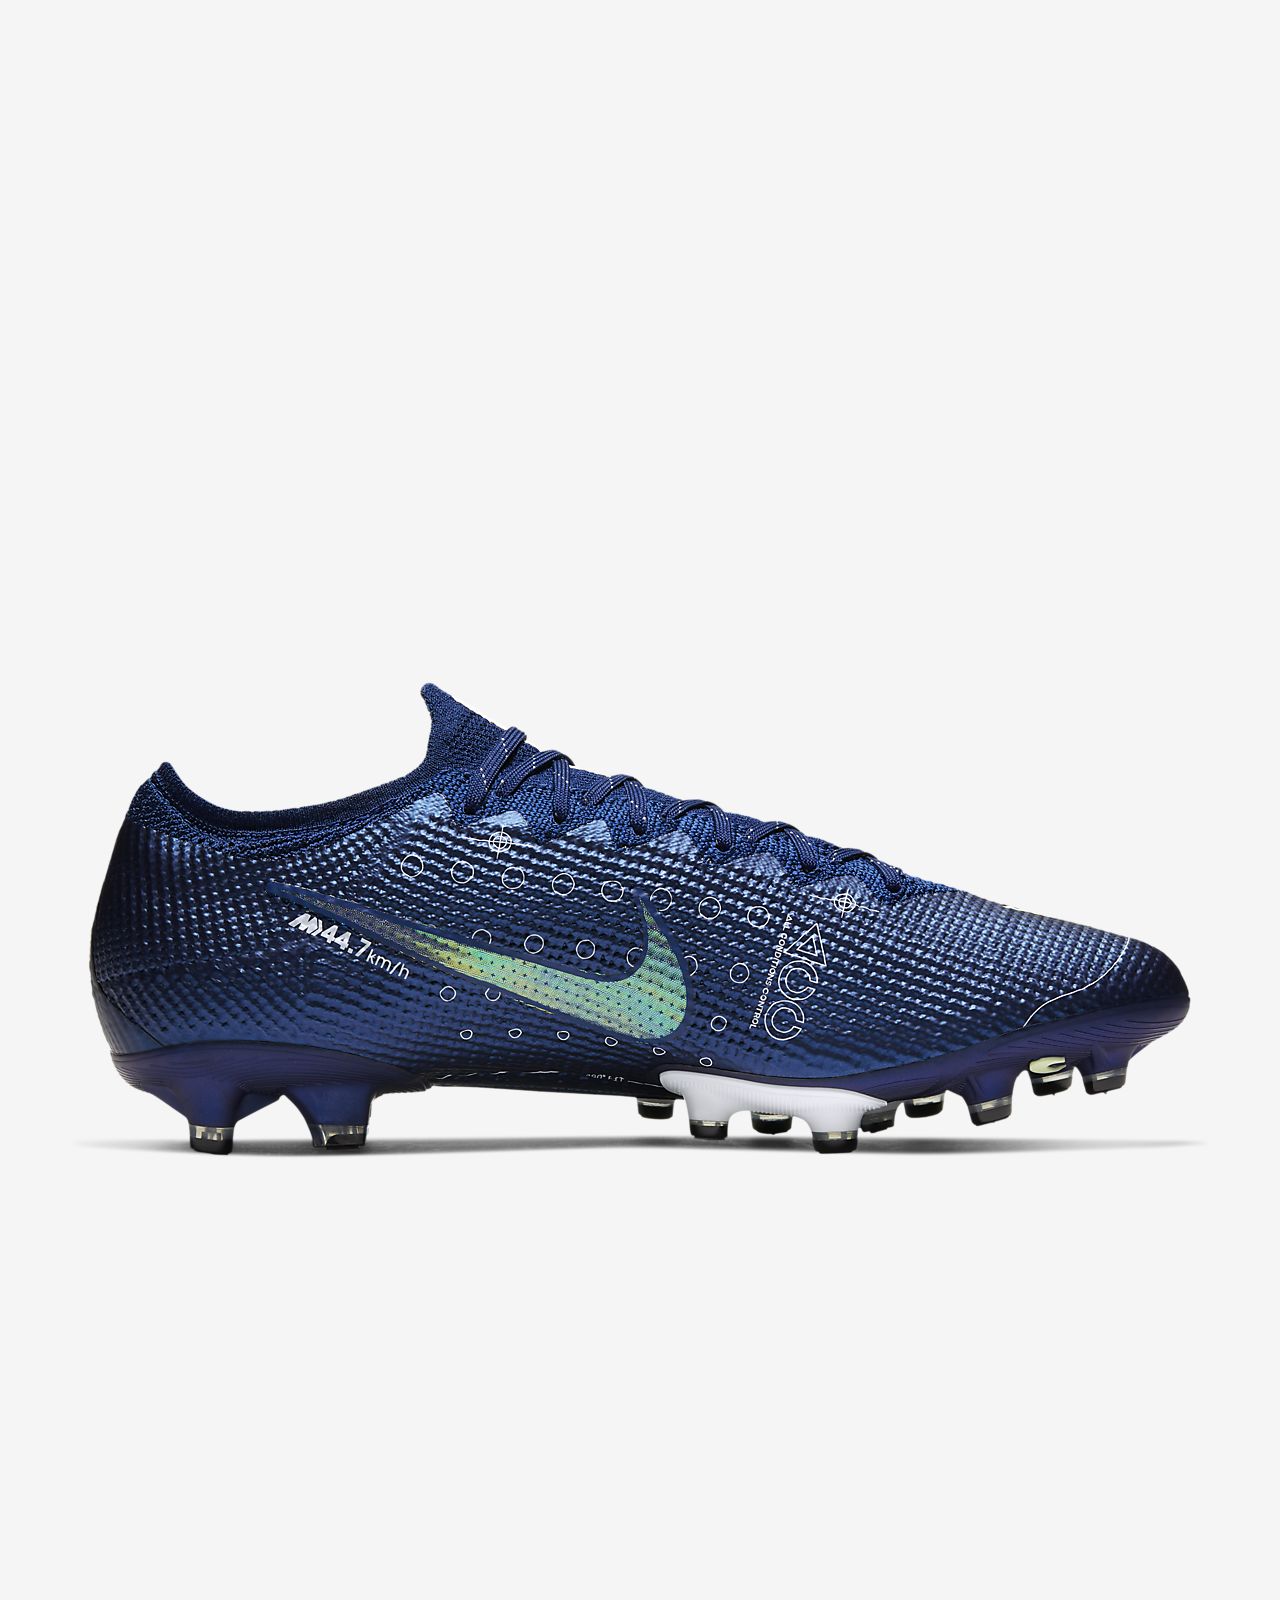 Nike Launch The Mercurial 'Dream Speed' Series Soccer .